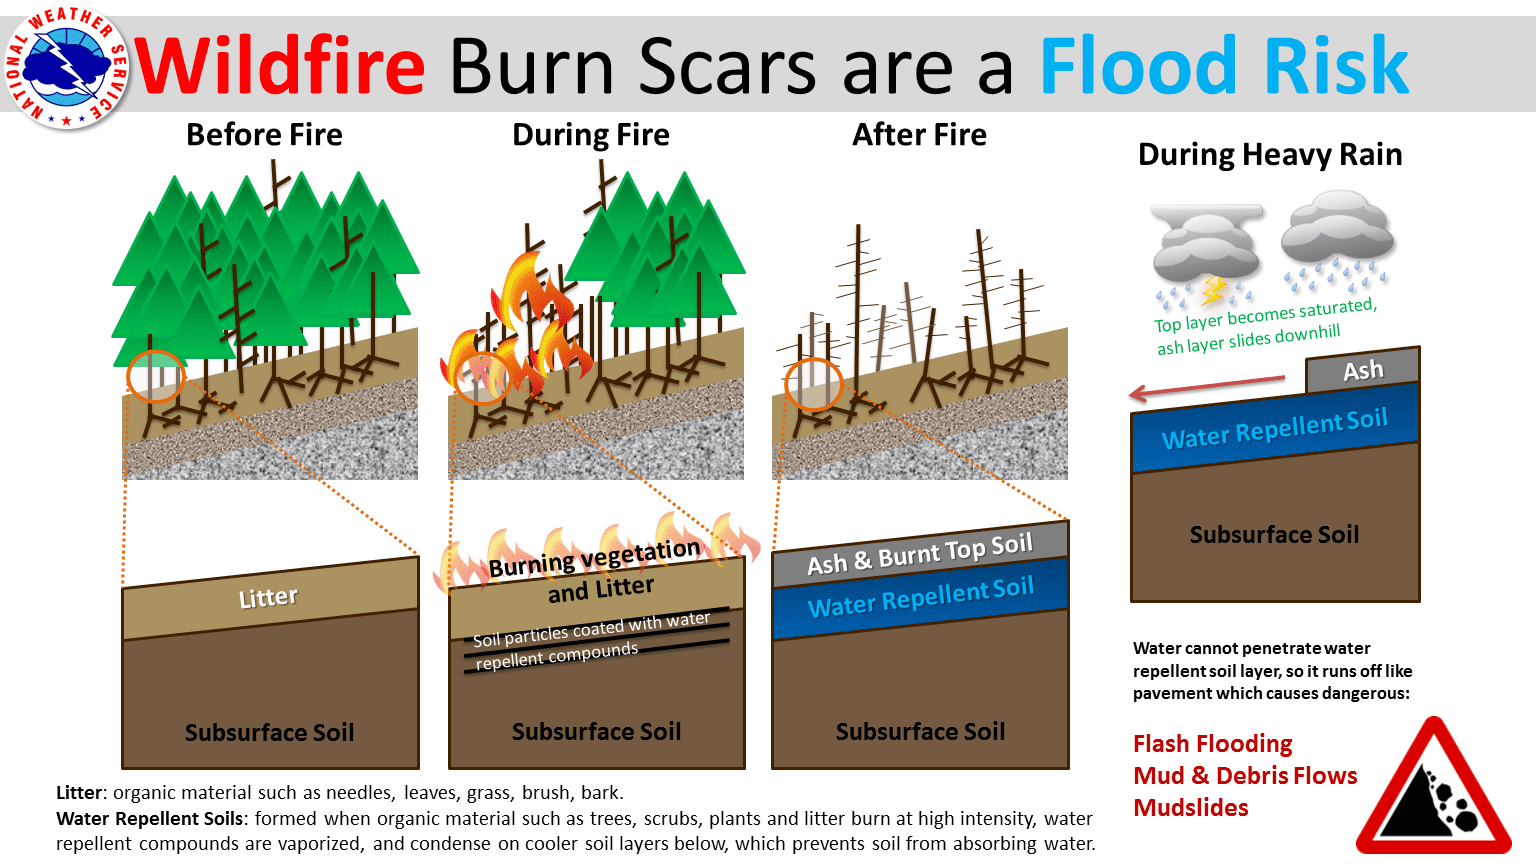 Why Floods Often Follow Fires and How to Keep Your Family Safe During Flood